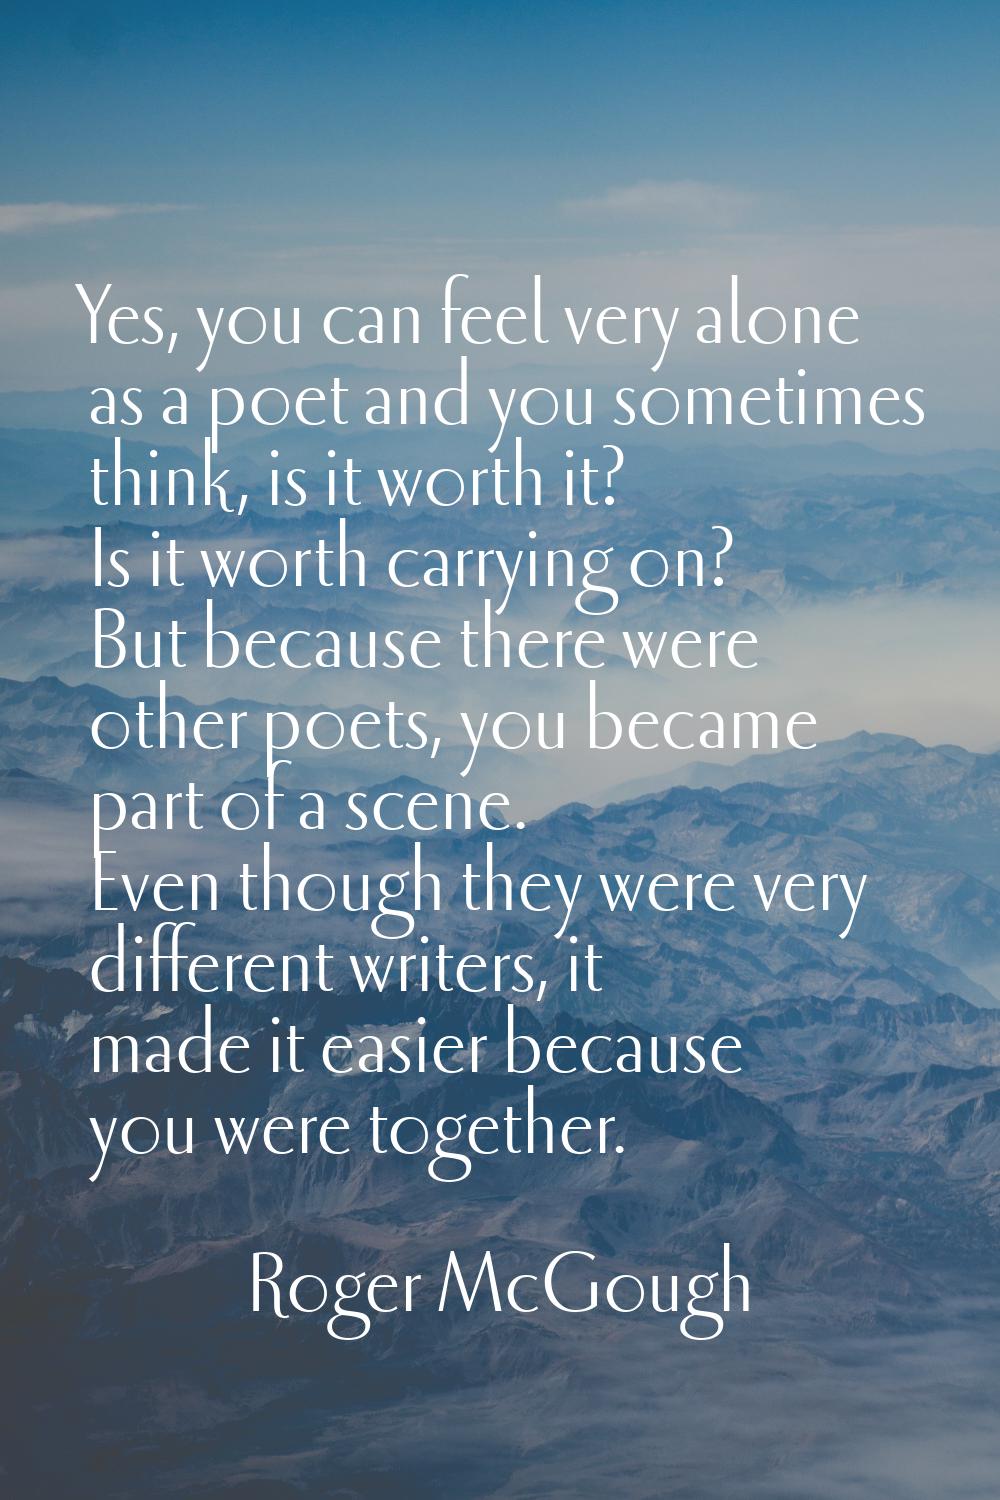 Yes, you can feel very alone as a poet and you sometimes think, is it worth it? Is it worth carryin